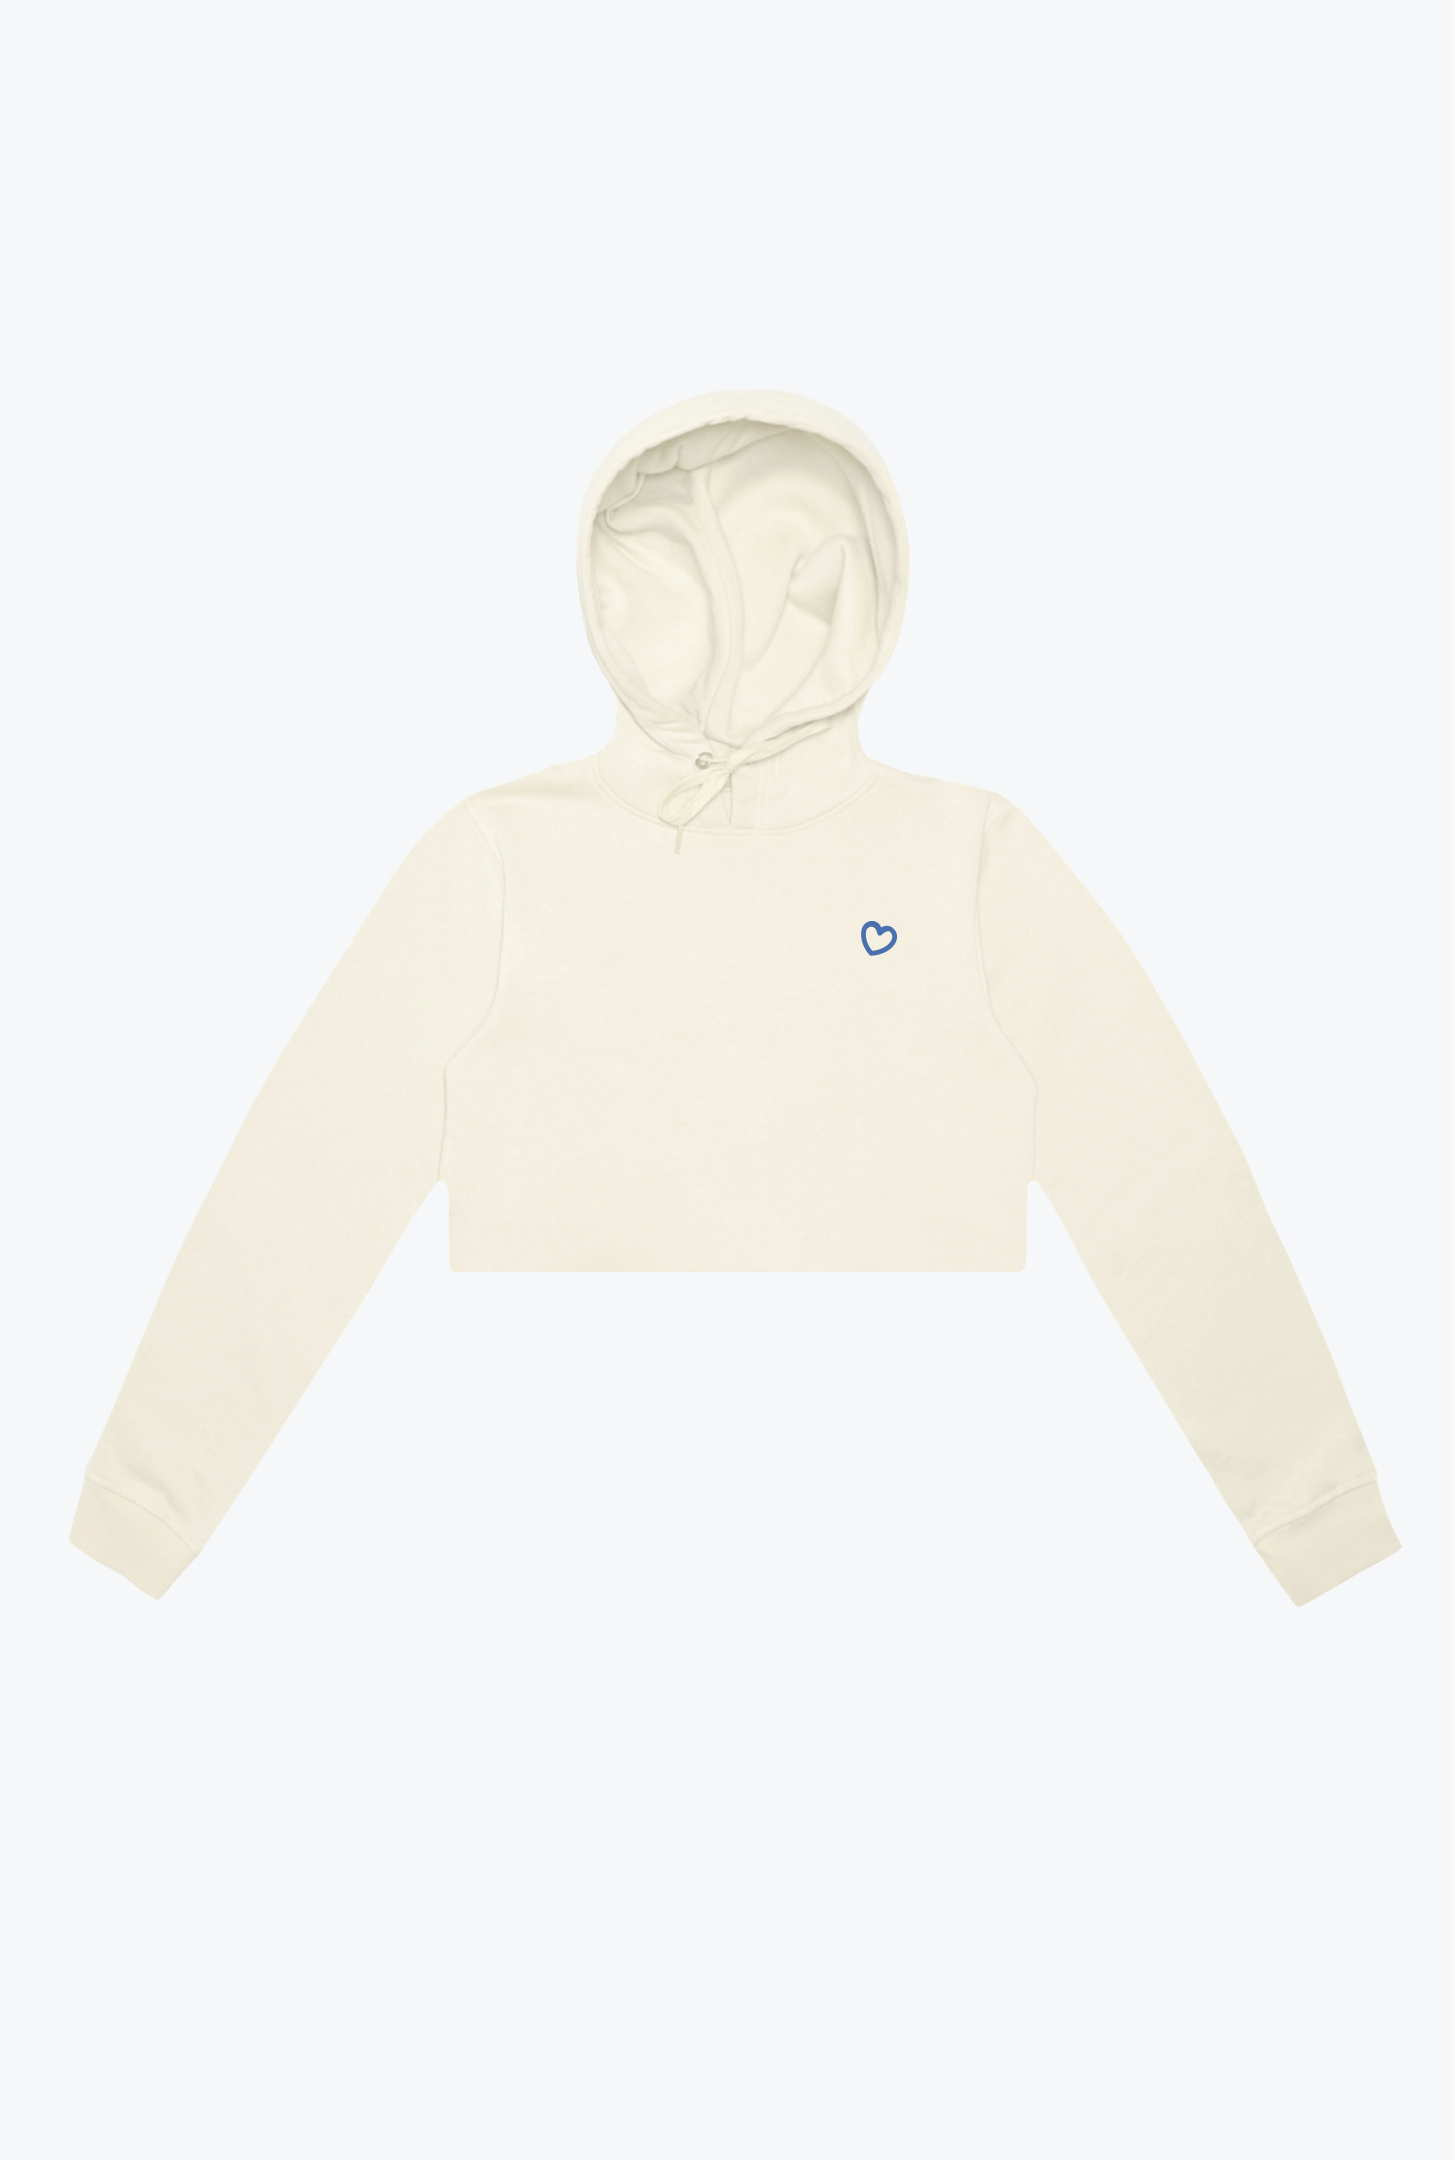 Chaos Cropped Hoodie - Ivory